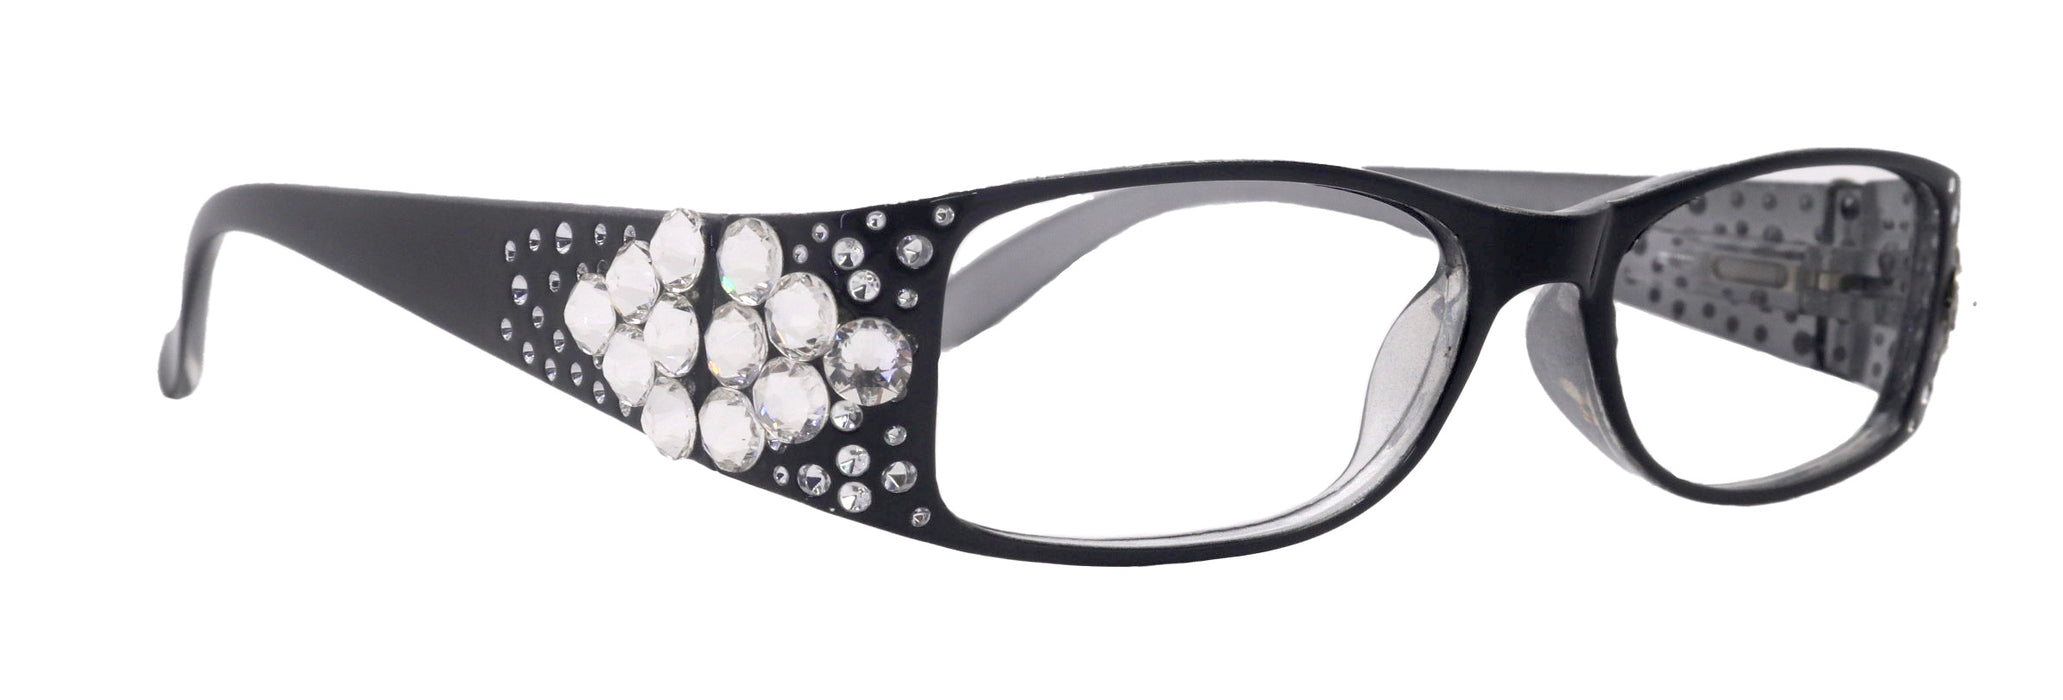 Merkel, The Diamond Crystal Shape, Bling Women Reading Glasses, Adorned w Clear Genuine European Crystals +1.50 to +3. NY Fifth Avenue.